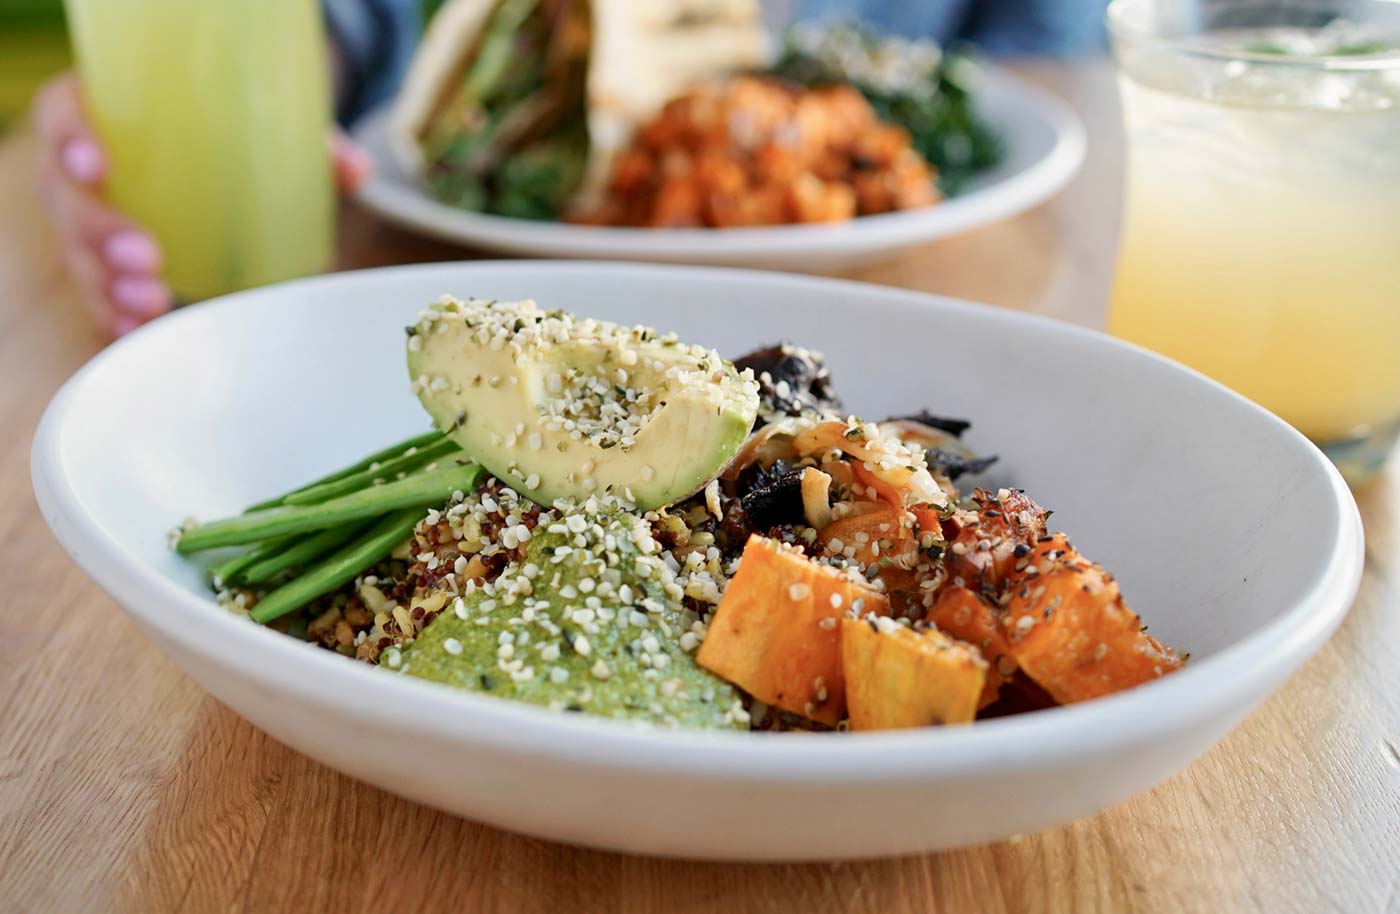 The Ancient Grains Bowl is the most popular dish on the menu. (Photos courtesy of True Food Kitchen)